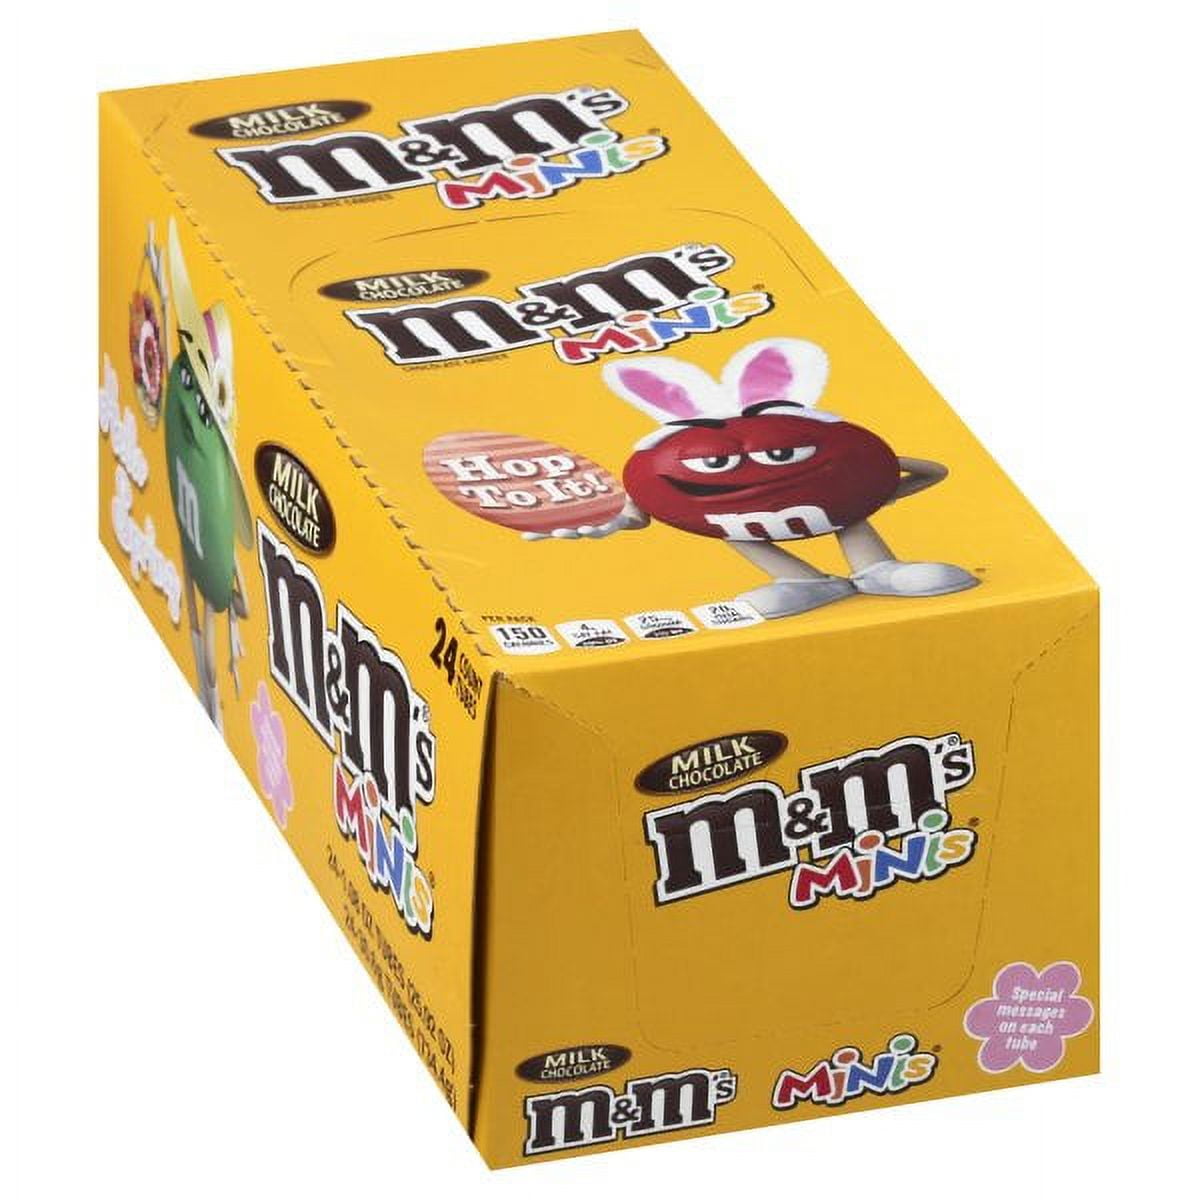 M&M'S MINIS Milk Chocolate Candy, 1.08-Ounce Tubes (Pack of 24) $15.67 +  Free Shipping